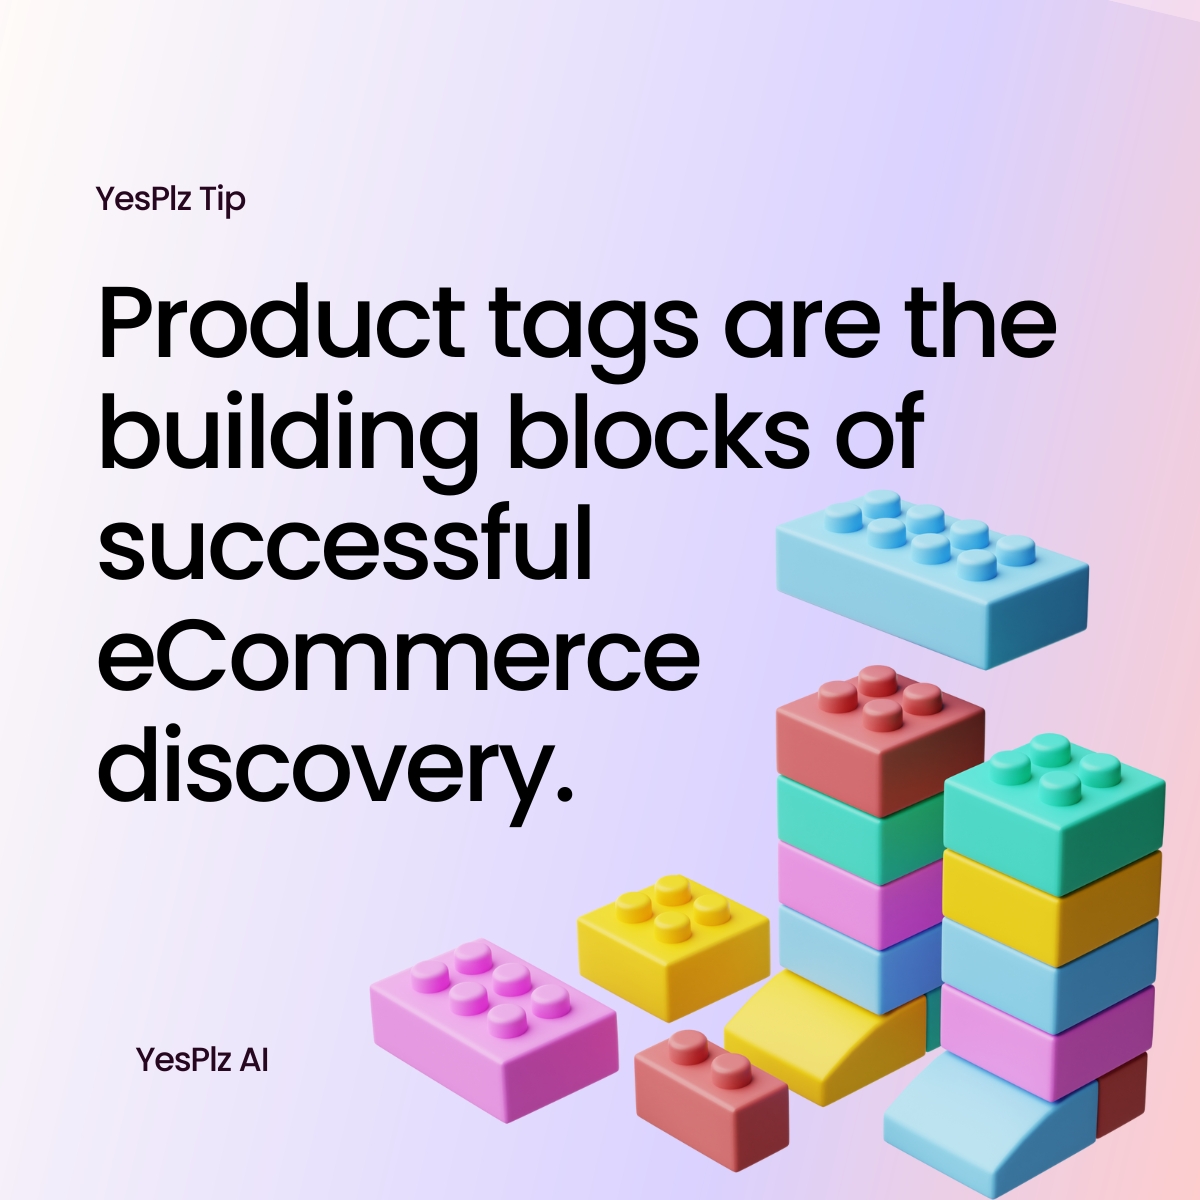 Product tagging is the building block of eCommerce discovery with 3D building blocks